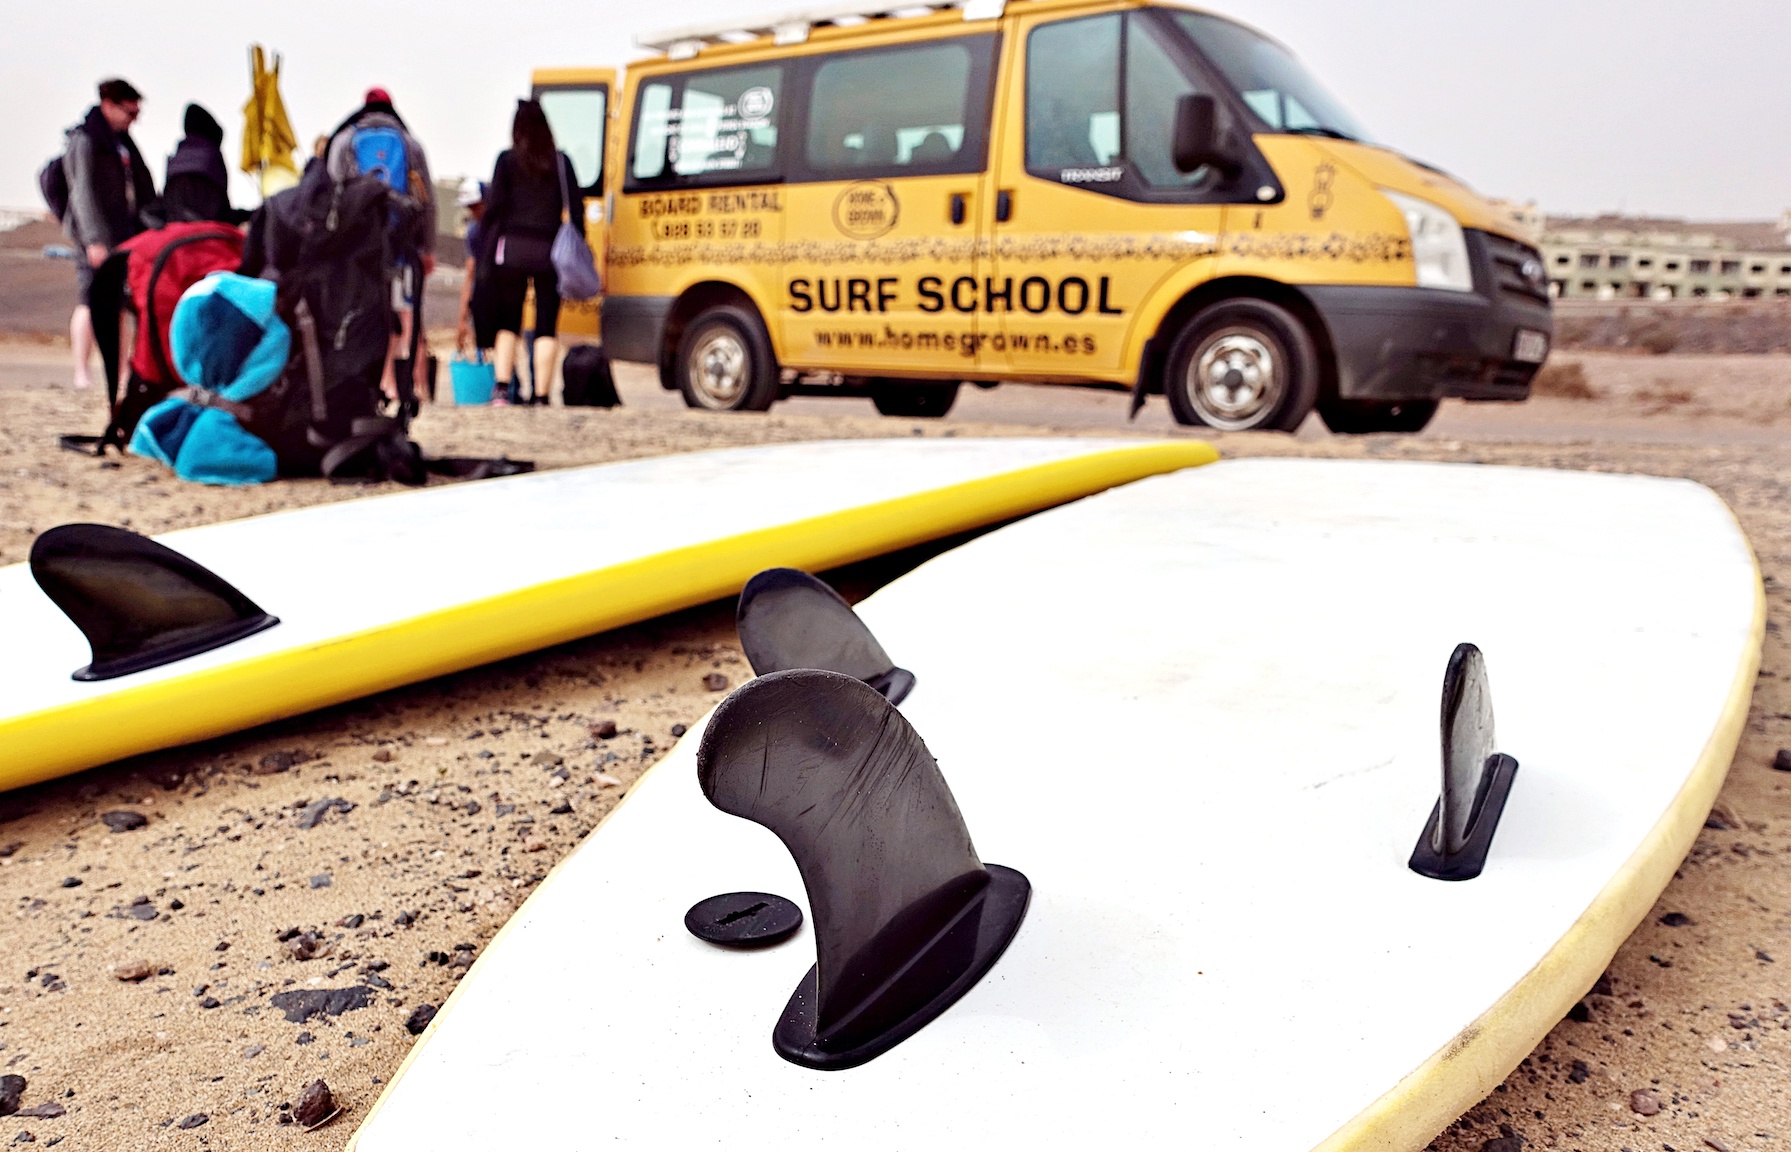 Surfboards on the sand with yellow van in the background